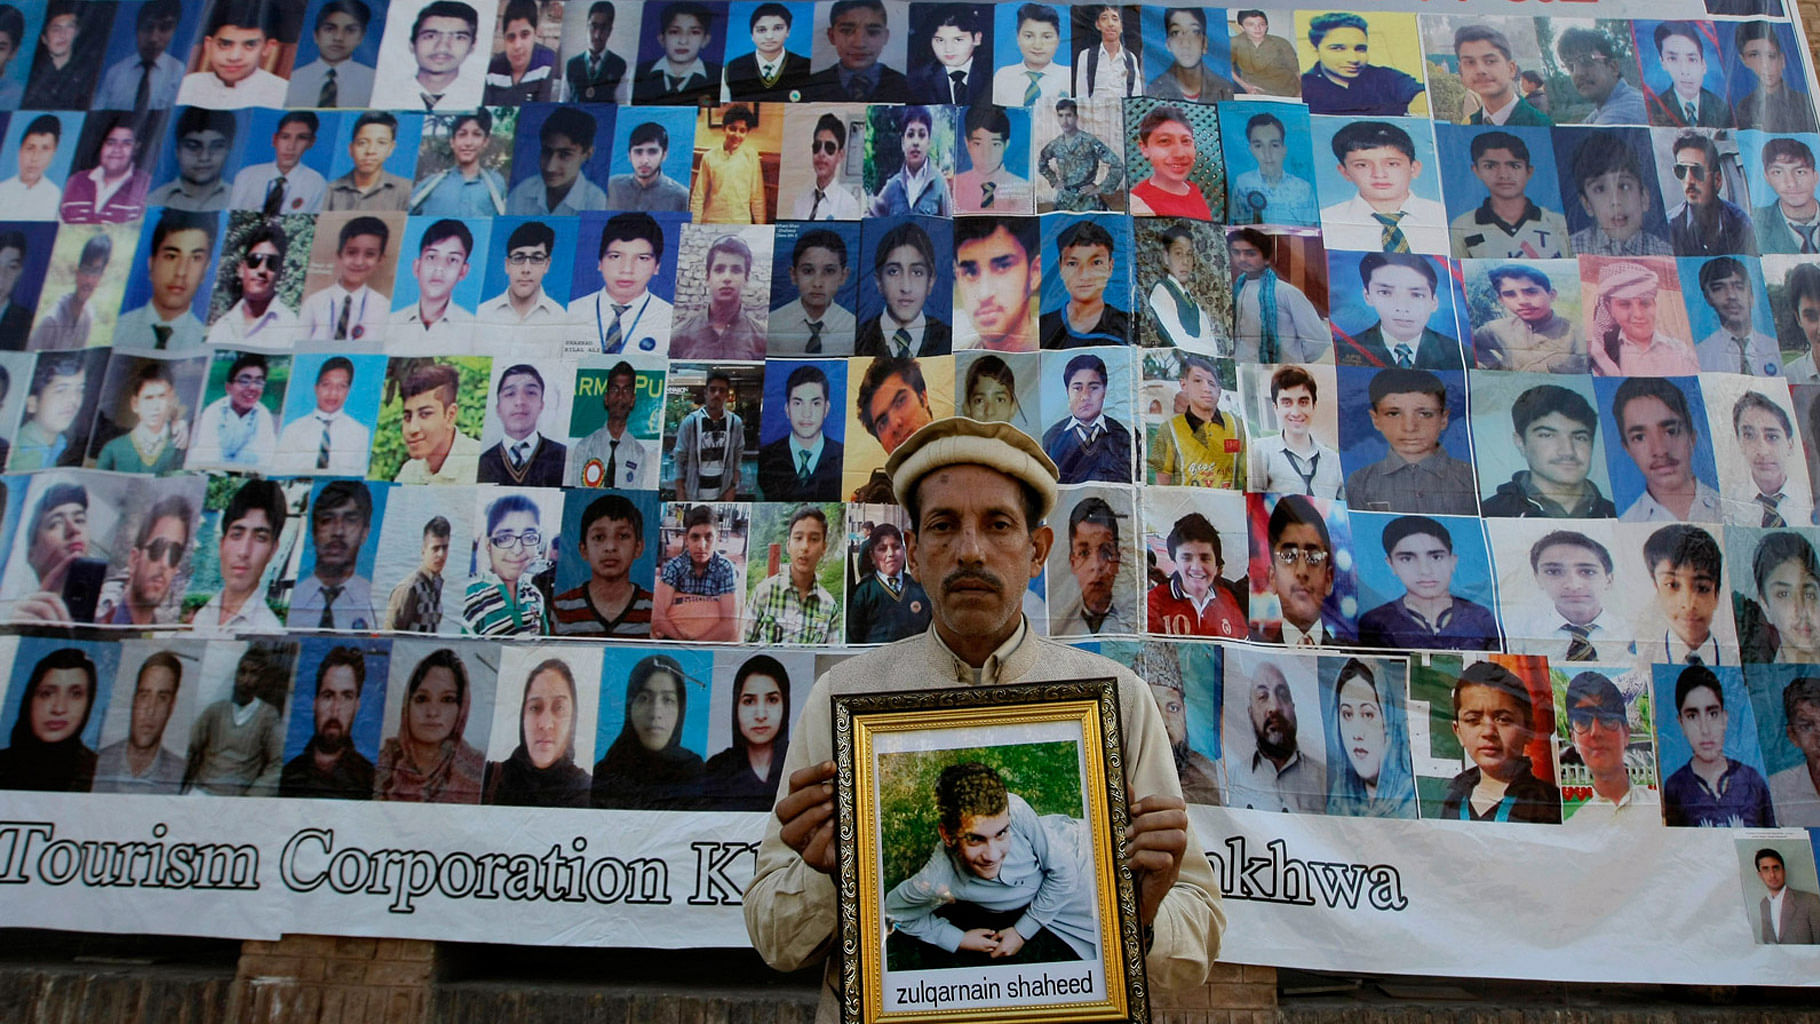 A Pakistani father holds a picture of his son who was killed in an attack, in front of photographs of other victims, ahead of the first anniversary of the Peshawar school attack on December 15. (Photo: AP)